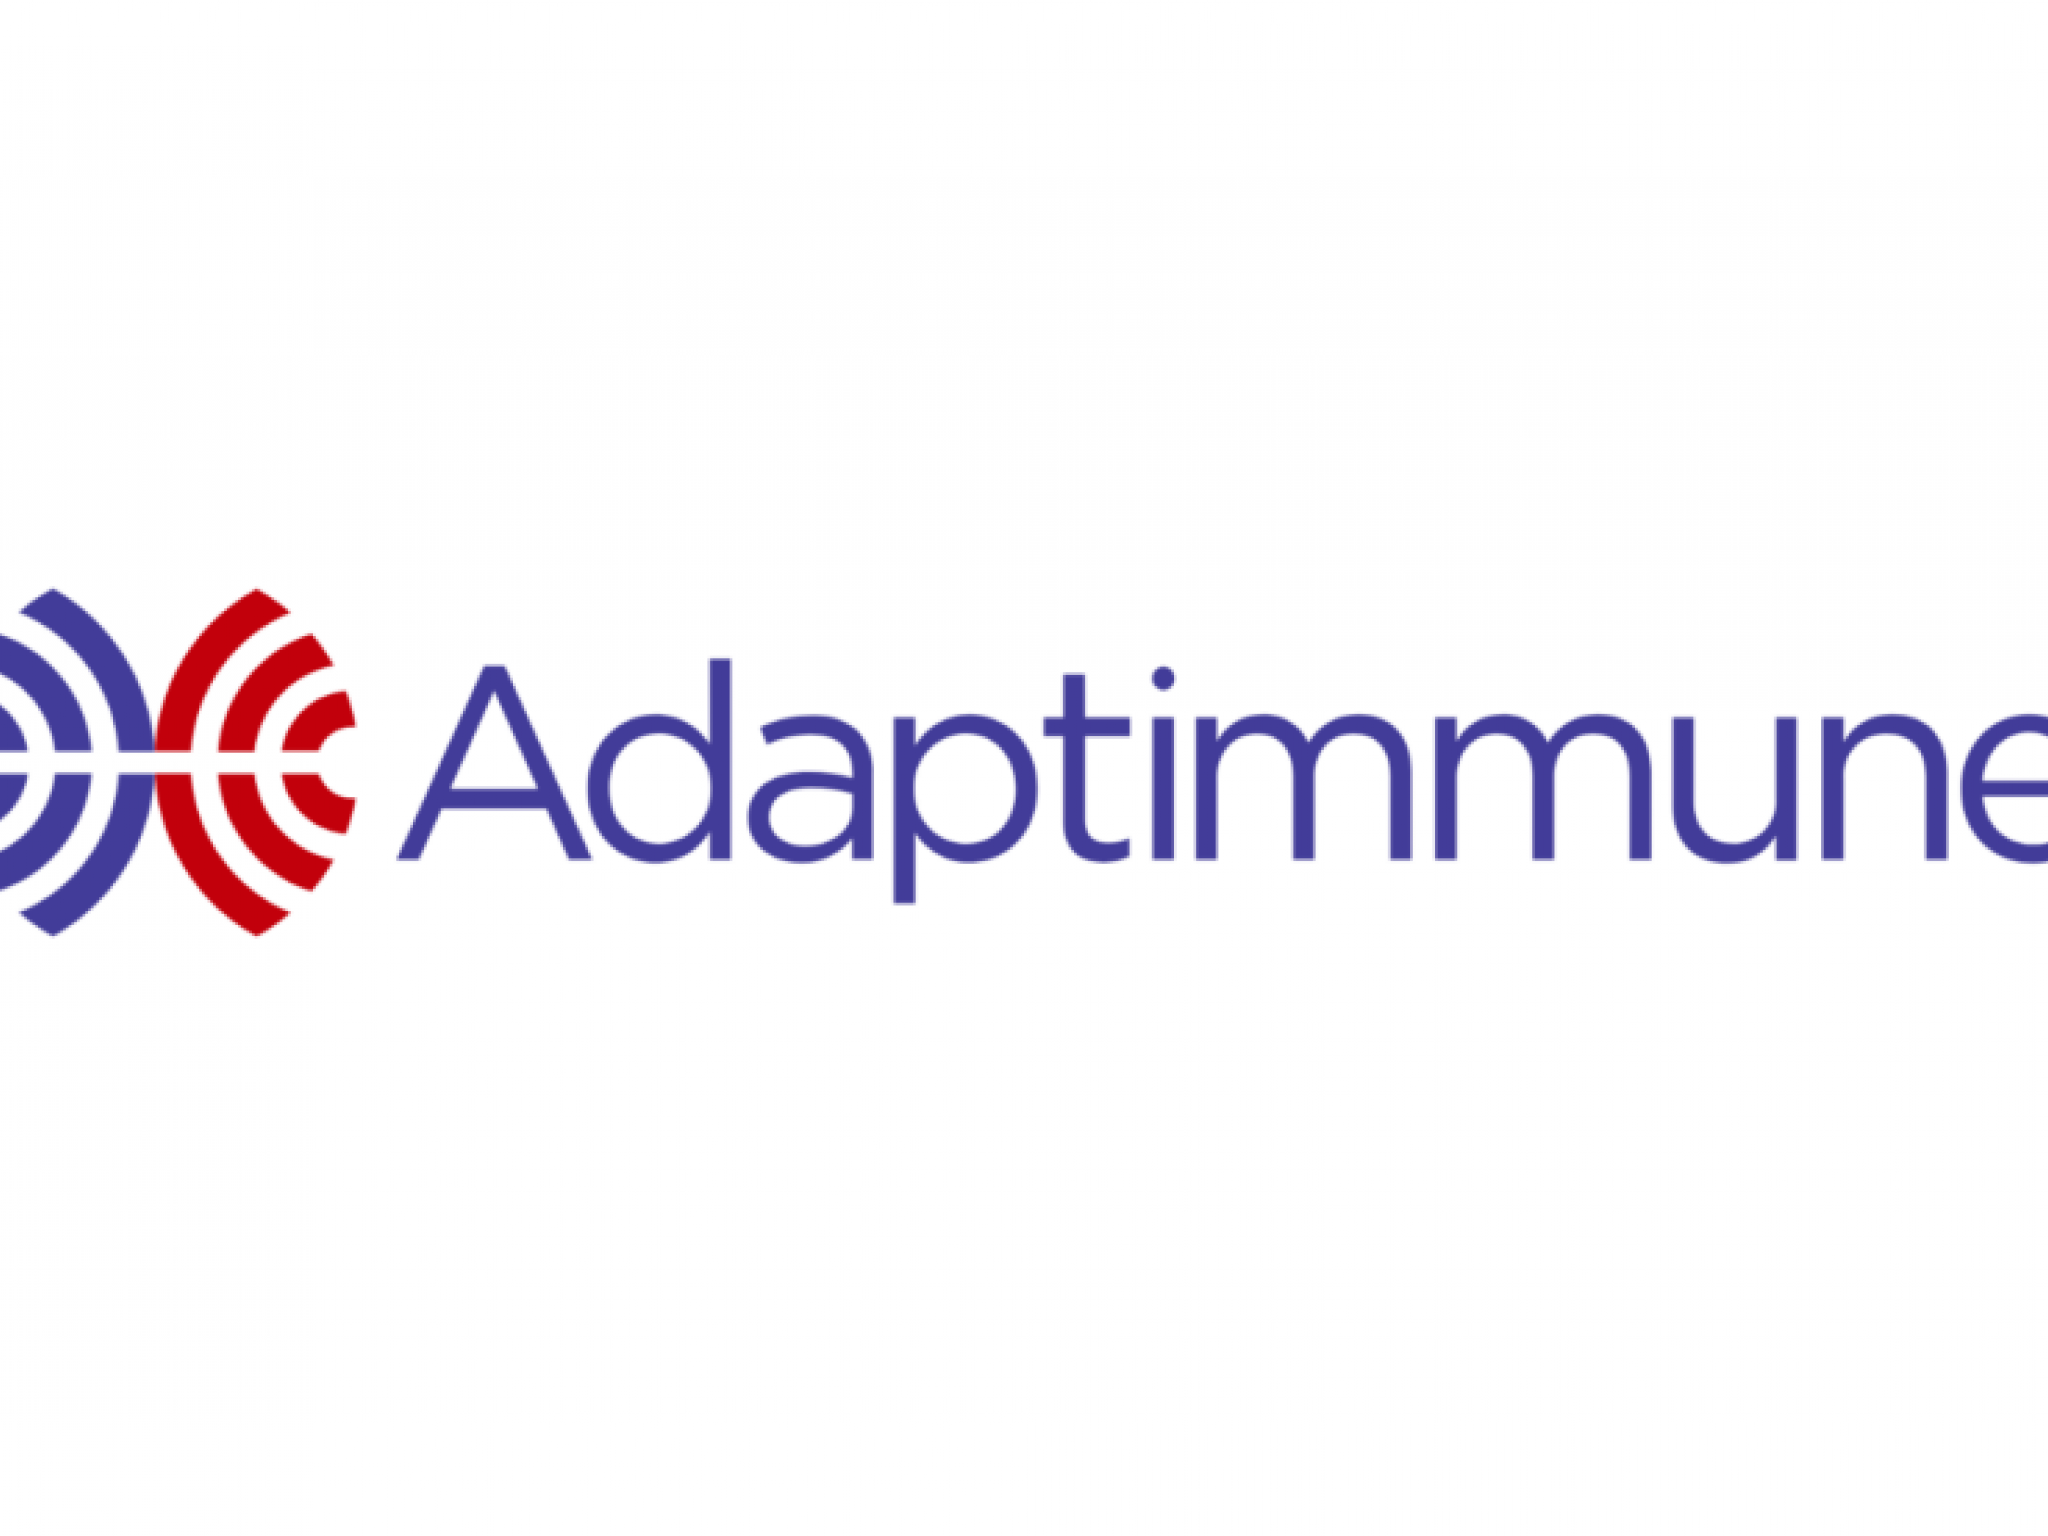  fda-approves-adaptimmune-therapeutics-engineered-cell-therapy-as-first-for-solid-tumor-and-new-therapy-for-rare-soft-tissue-cancer-in-over-a-decade 